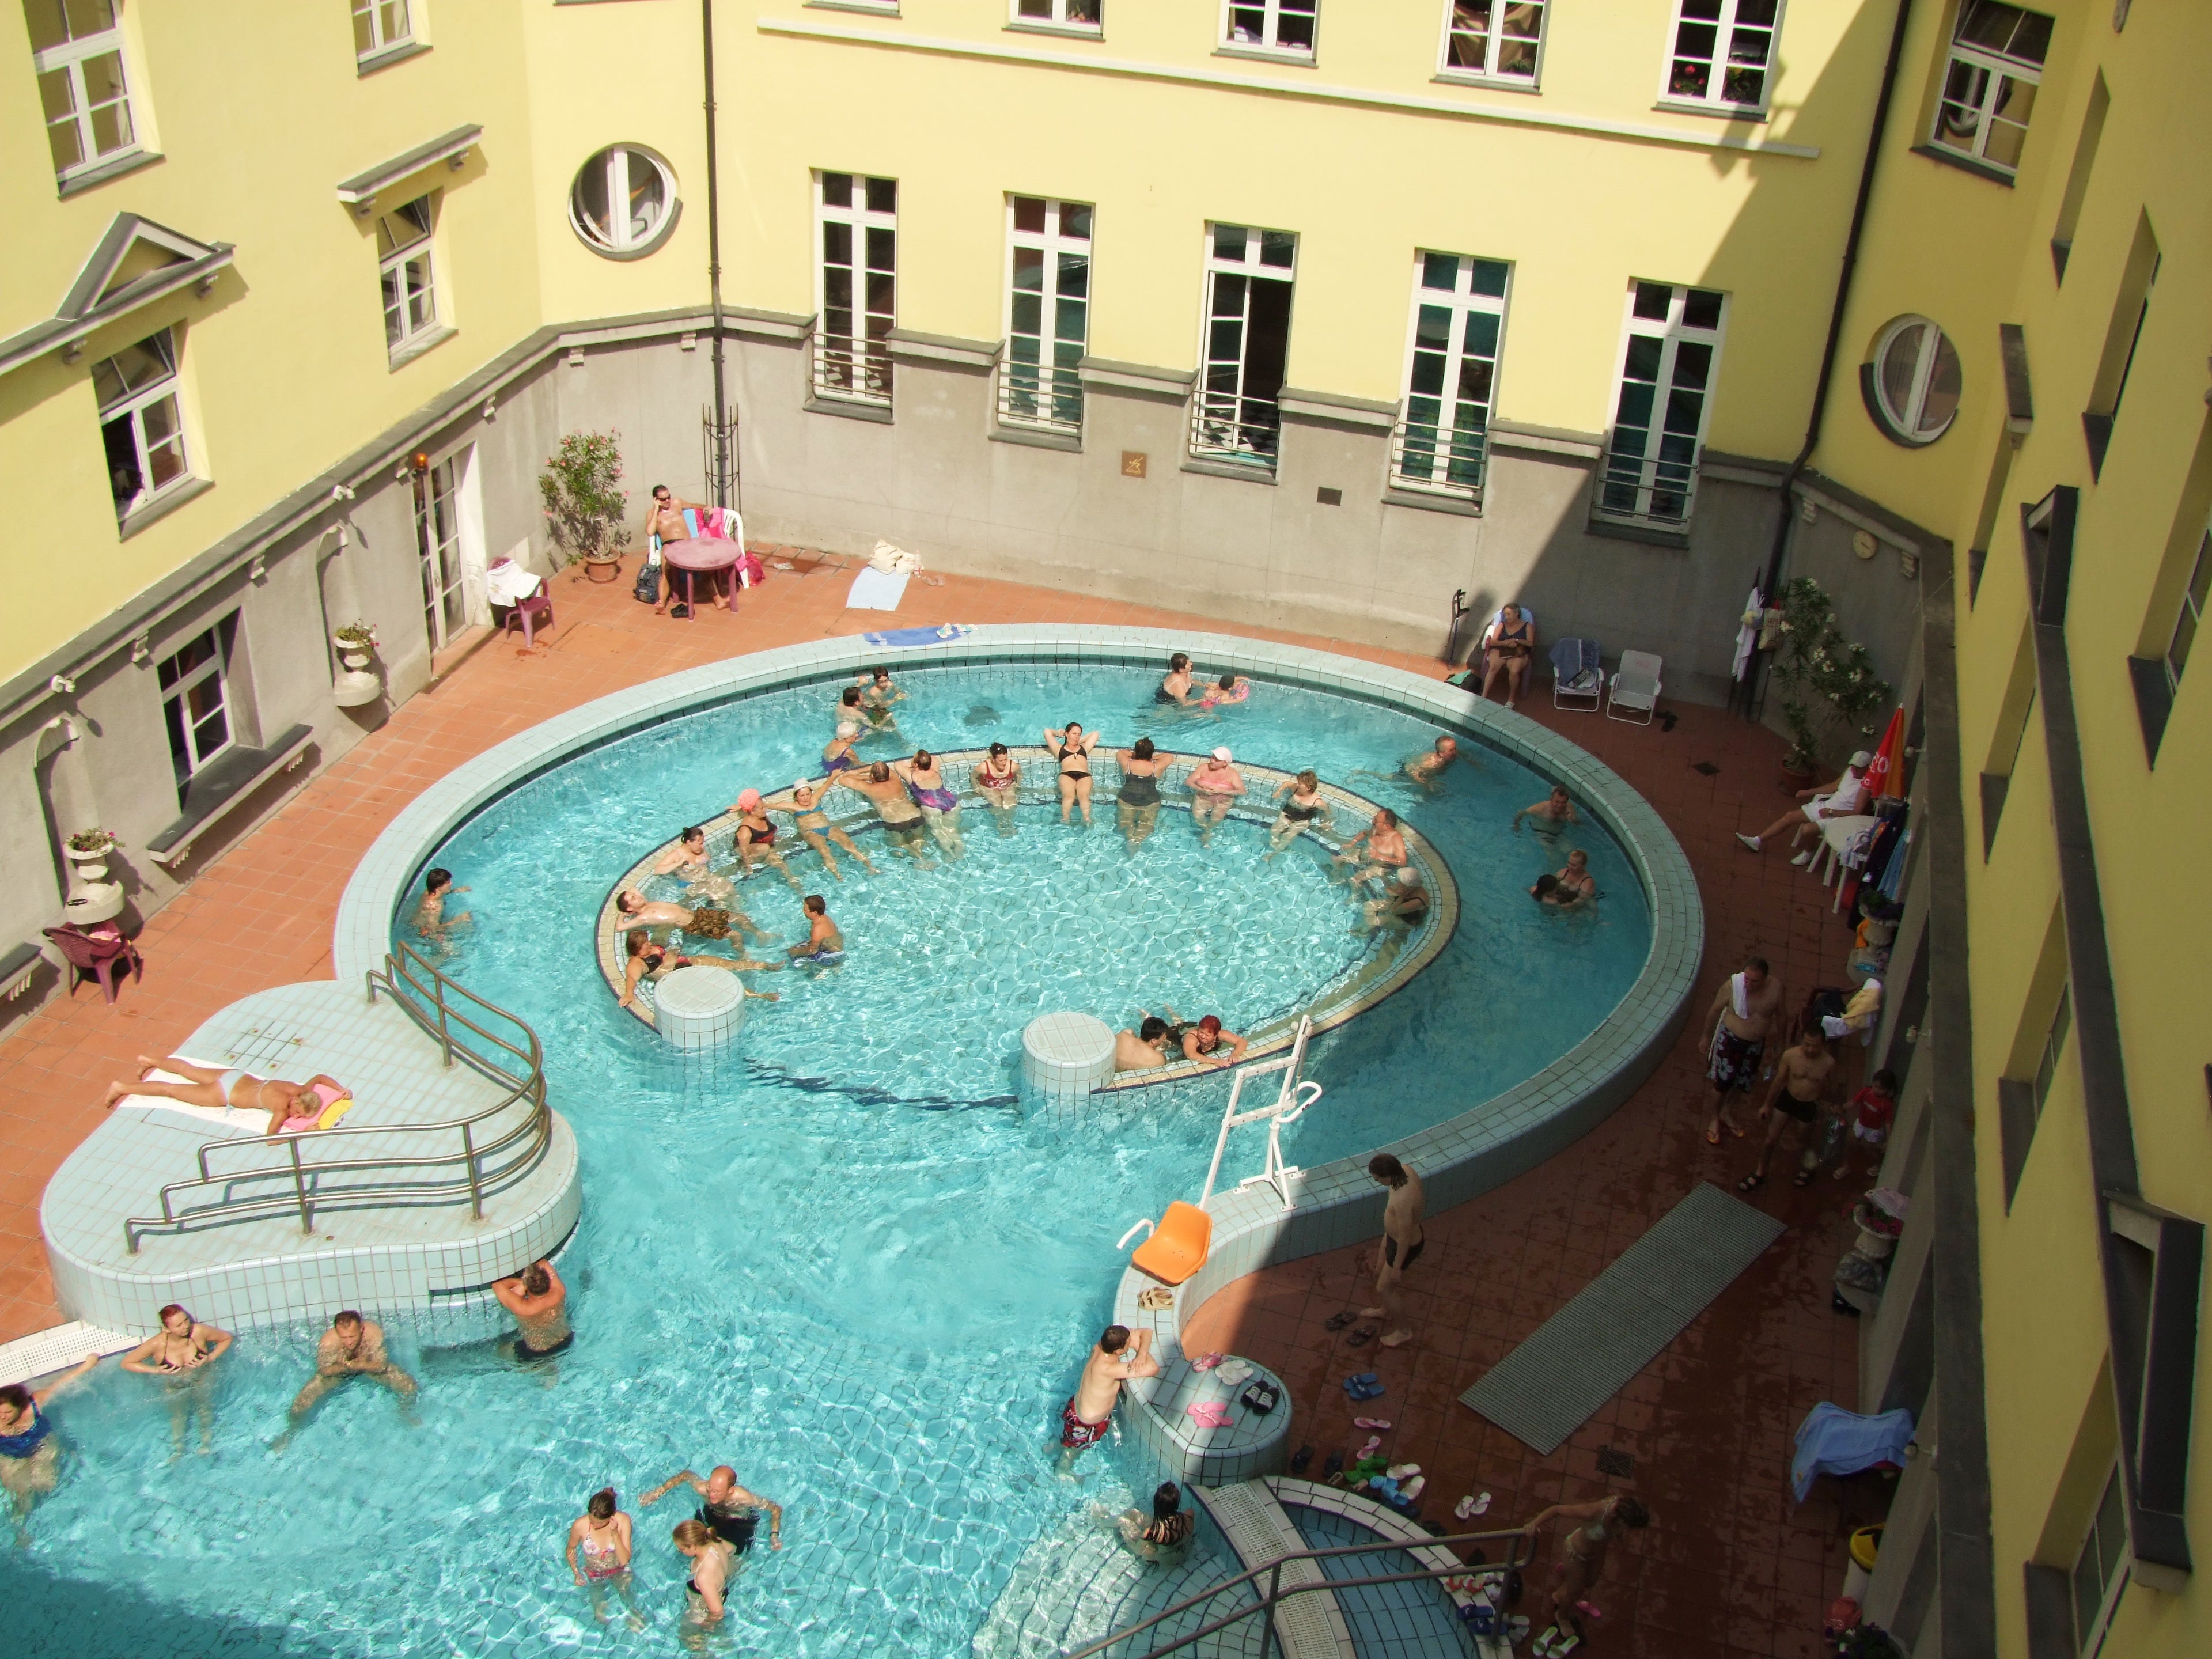 Lukács Thermal Bath is popular with both tourists and locals